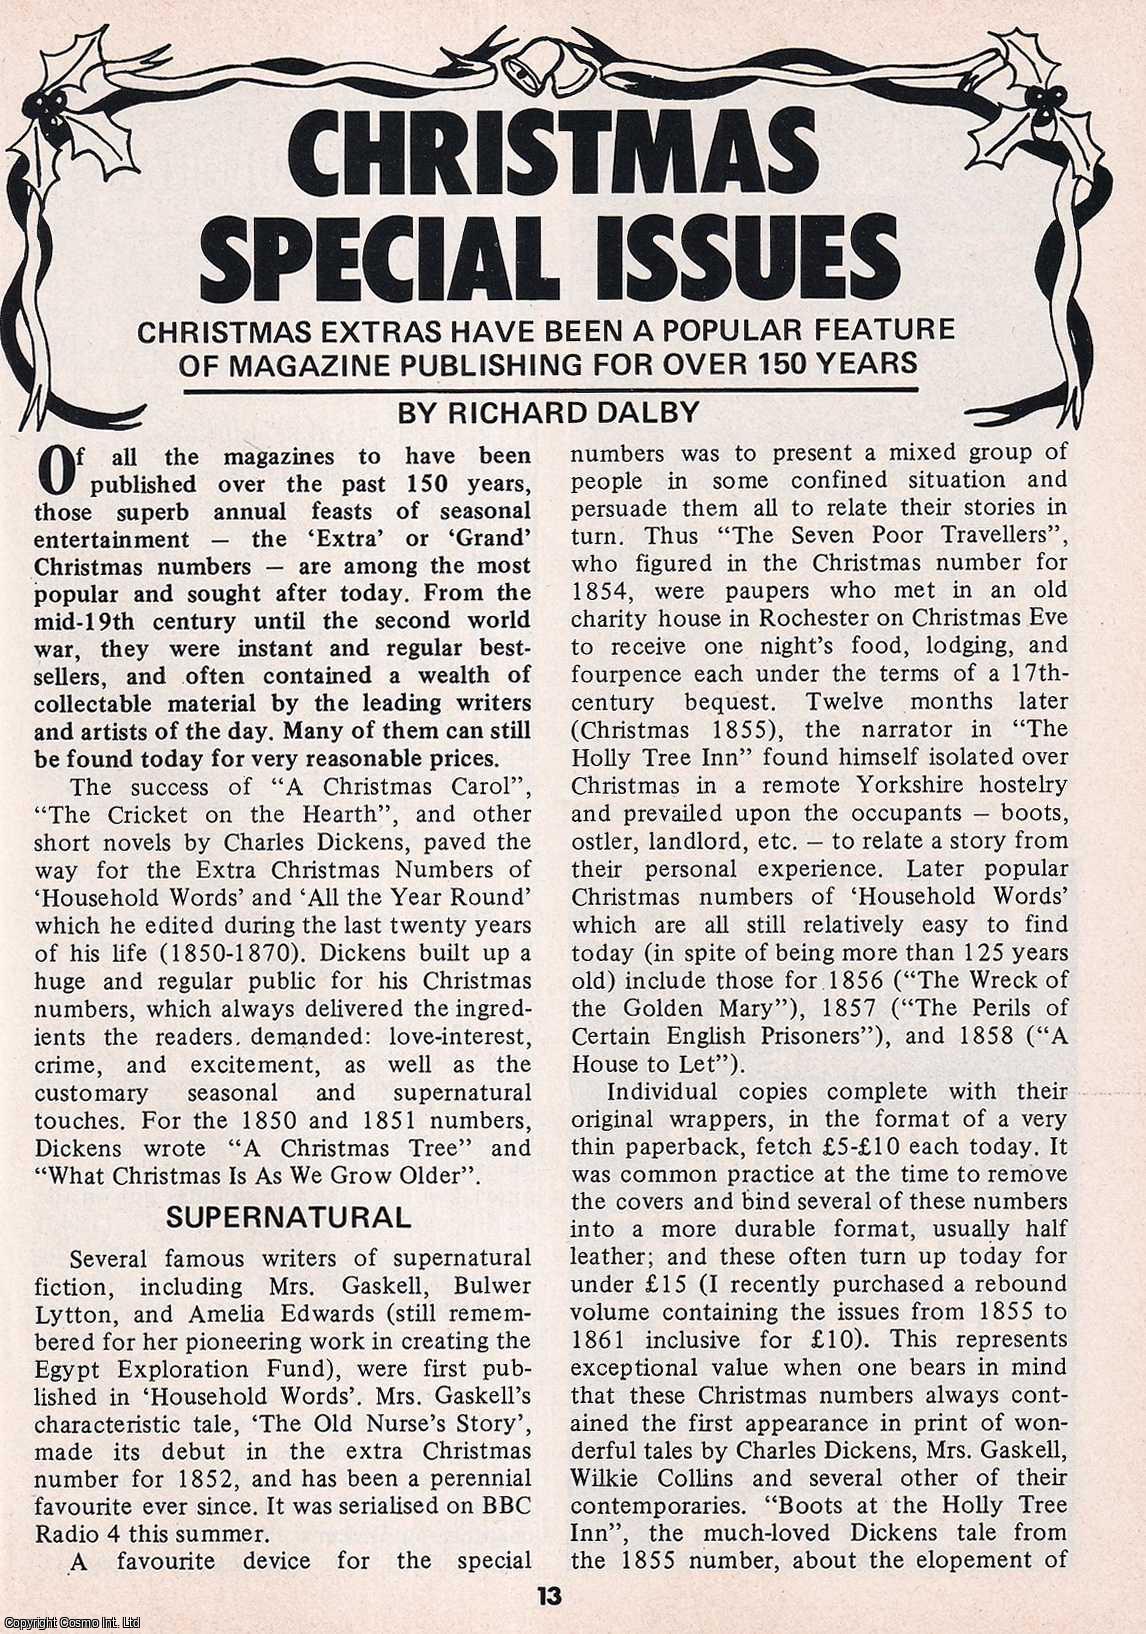 Richard Dalby - Christmas Special Issues : Magazine Publishing. This is an original article separated from an issue of The Book & Magazine Collector publication.